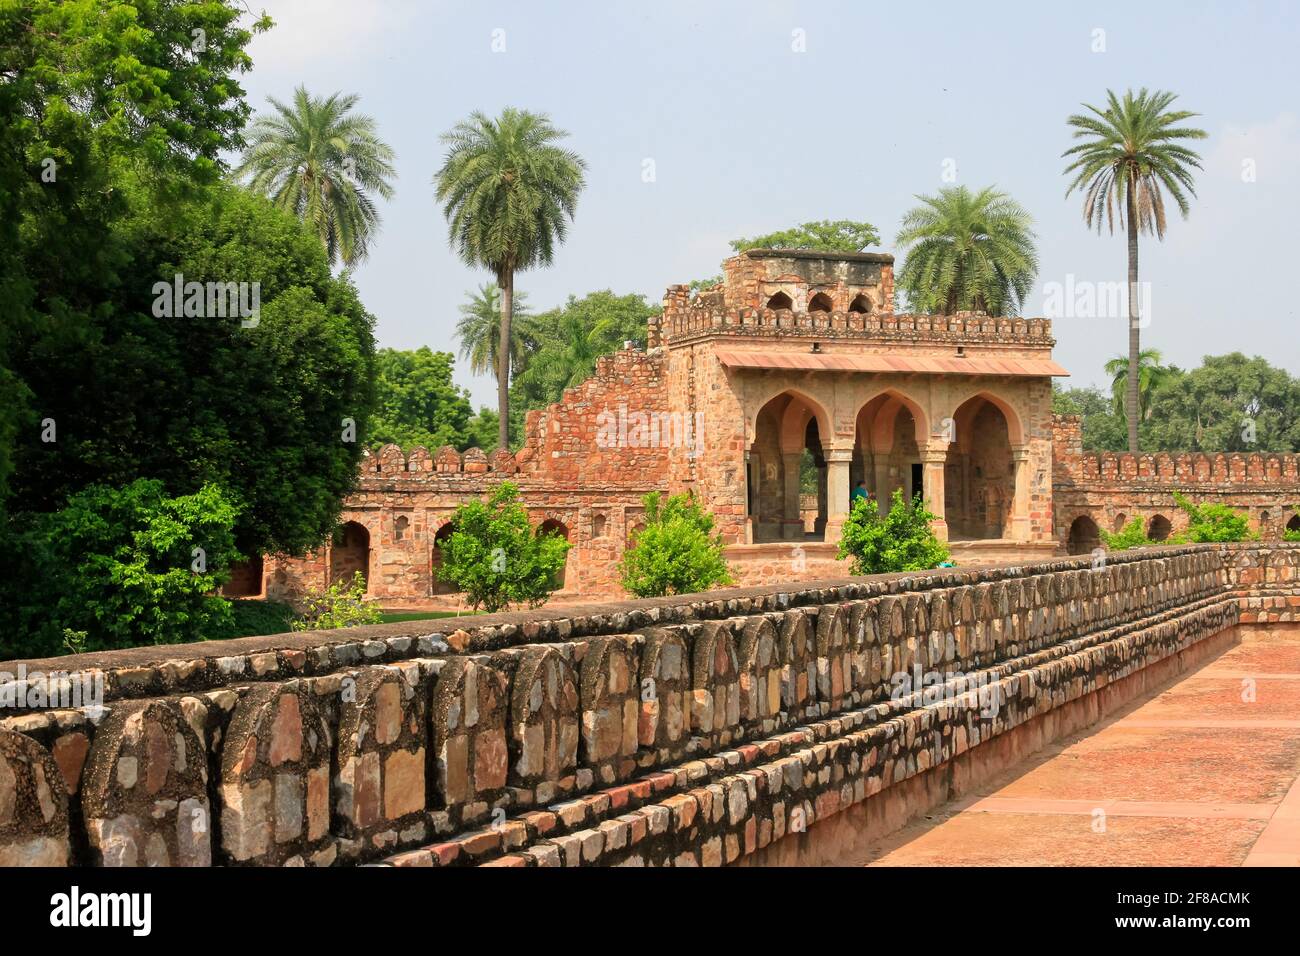 Red building with stone wall at Itmad-Ud-Daulah or baby Taj Mahal in Agra India with palm trees Stock Photo